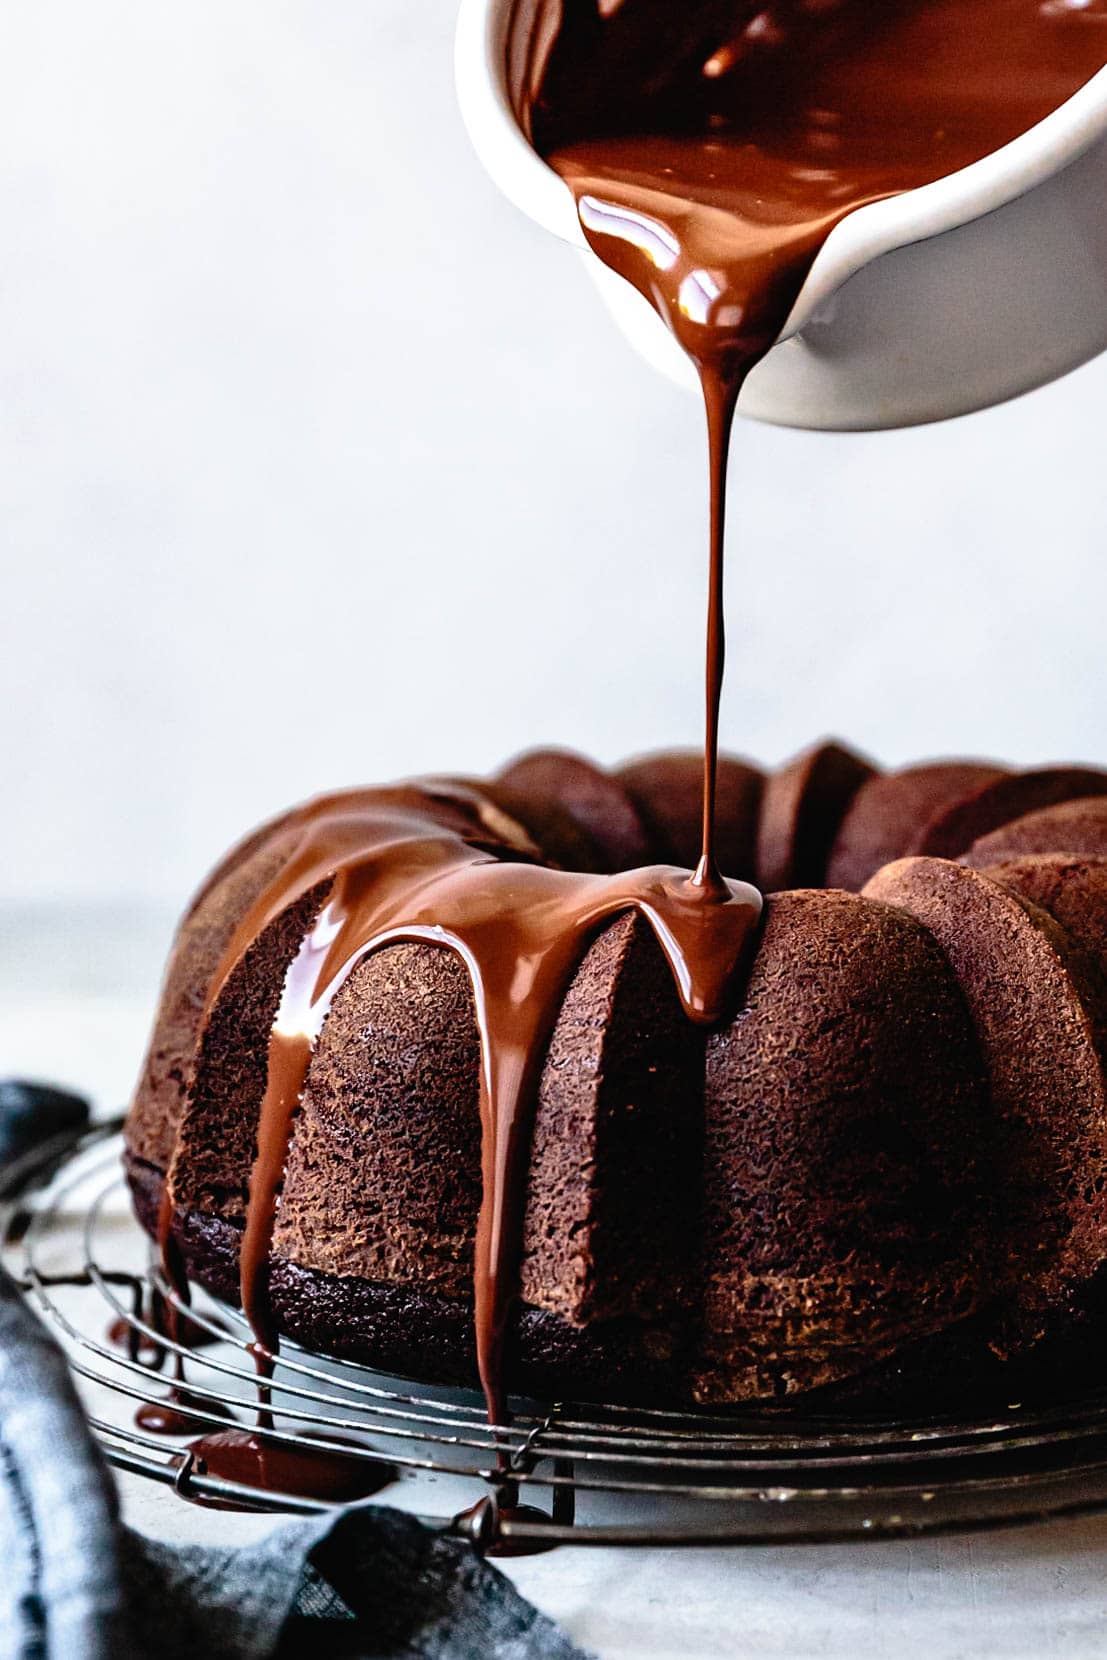 glossy creme fraiche ganache is being poured over and beautiful chocolate bundt cake